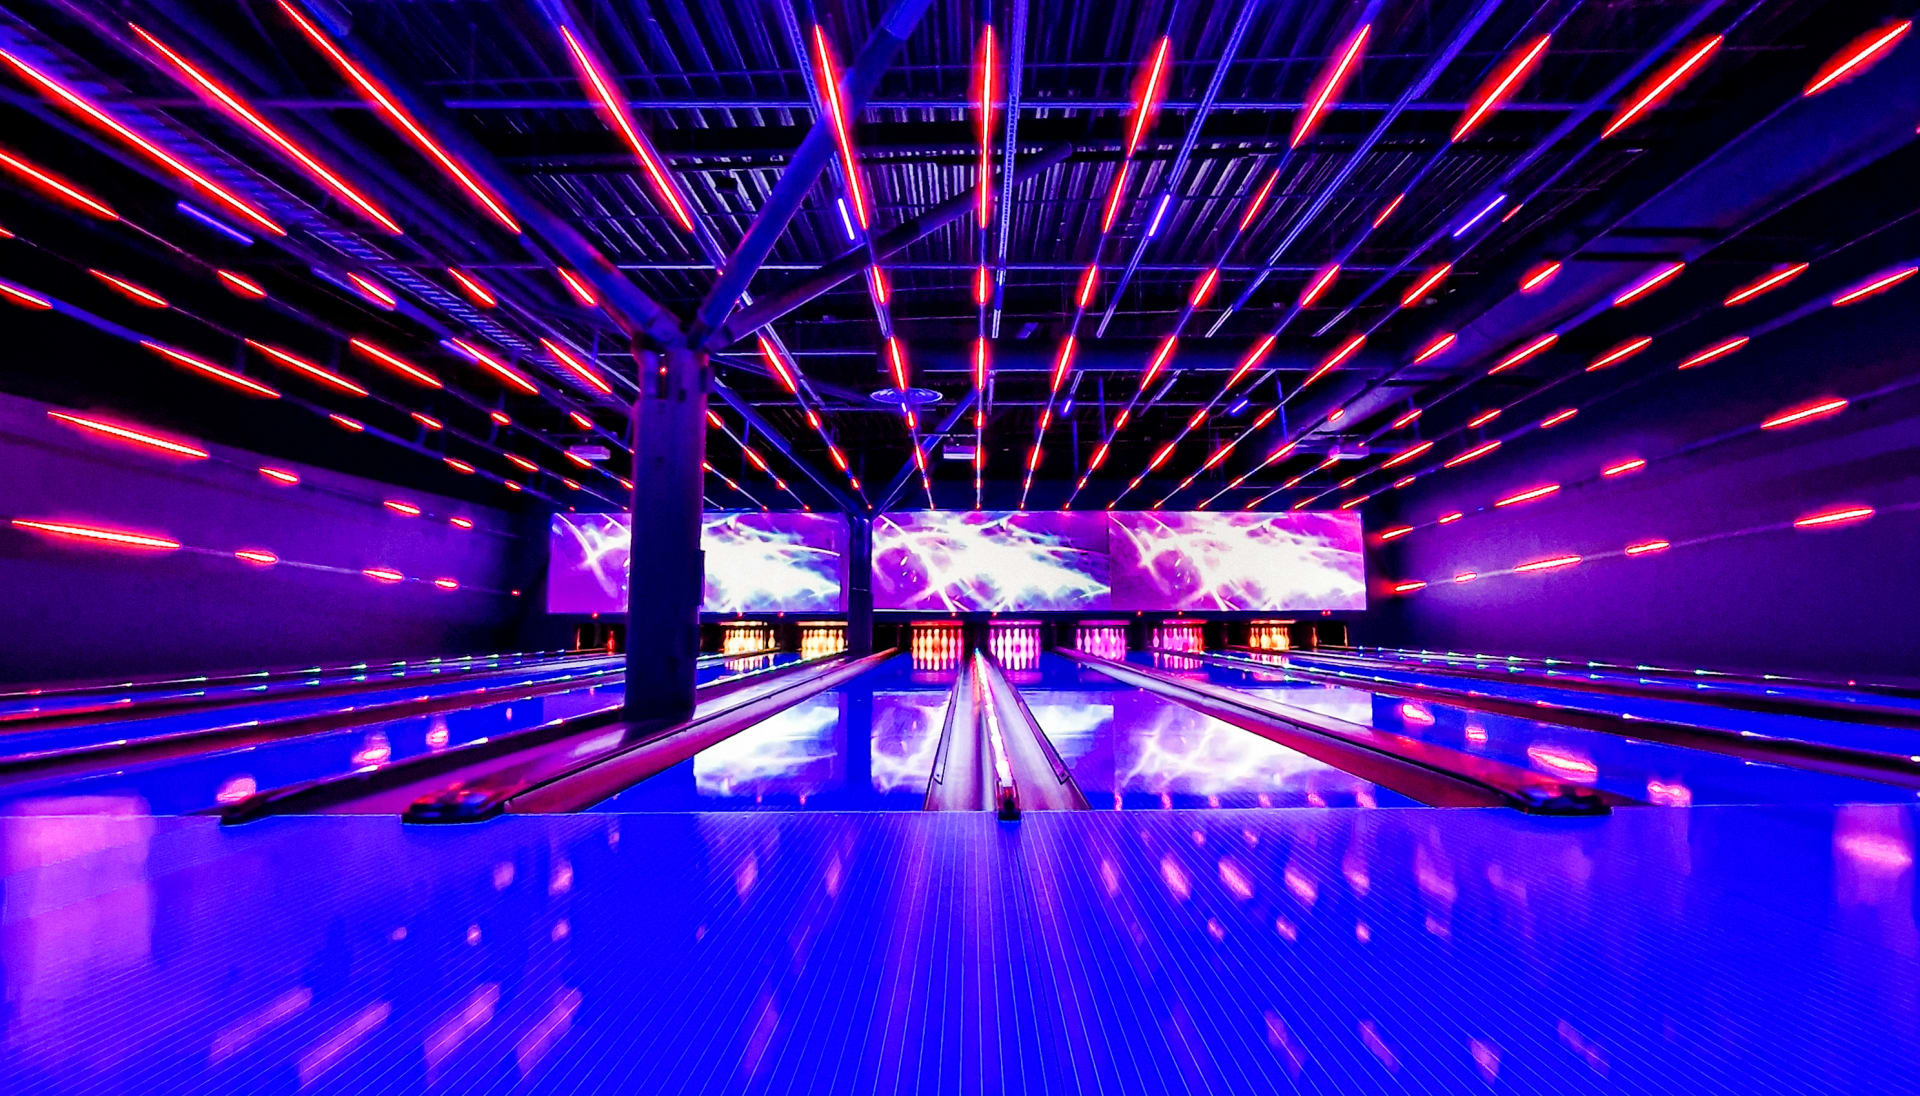 Bowling is the newest activity in Entertainment Center.